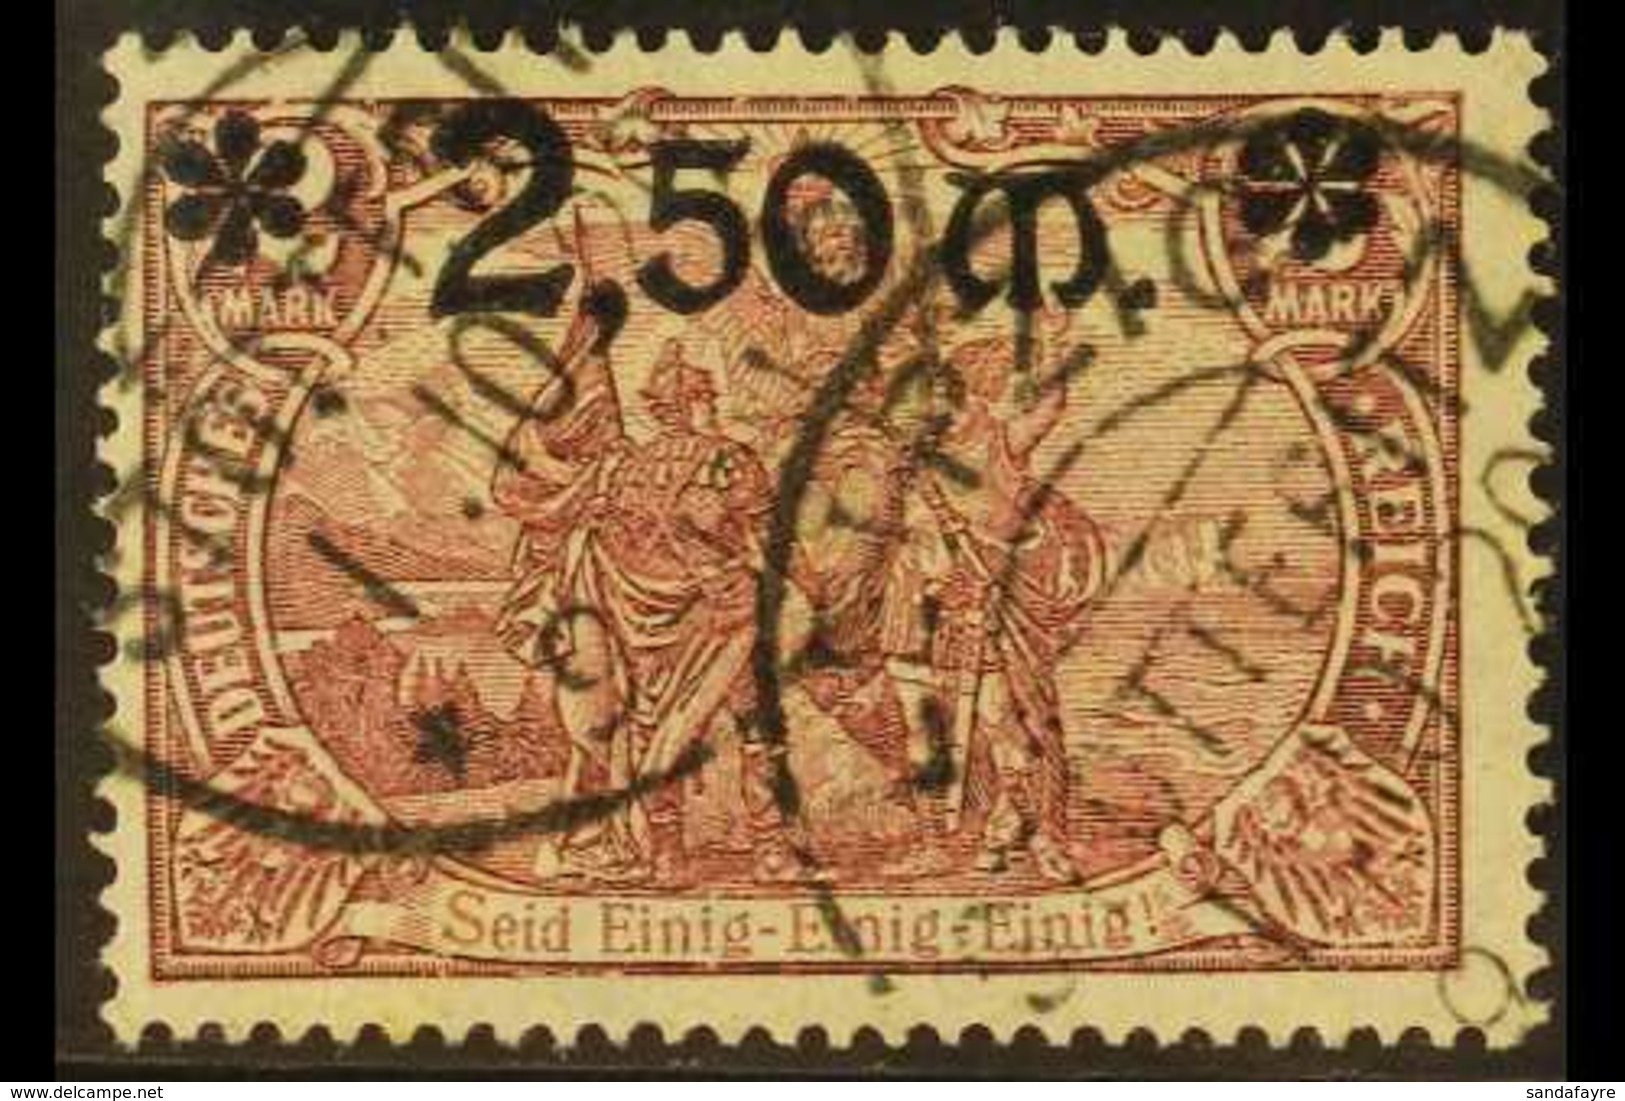 1920 2.50m On 2m Rosy Purple Surcharge (Michel 118, SG 139), Fine Used With Two Fully Dated Cds Cancels. For More Images - Other & Unclassified